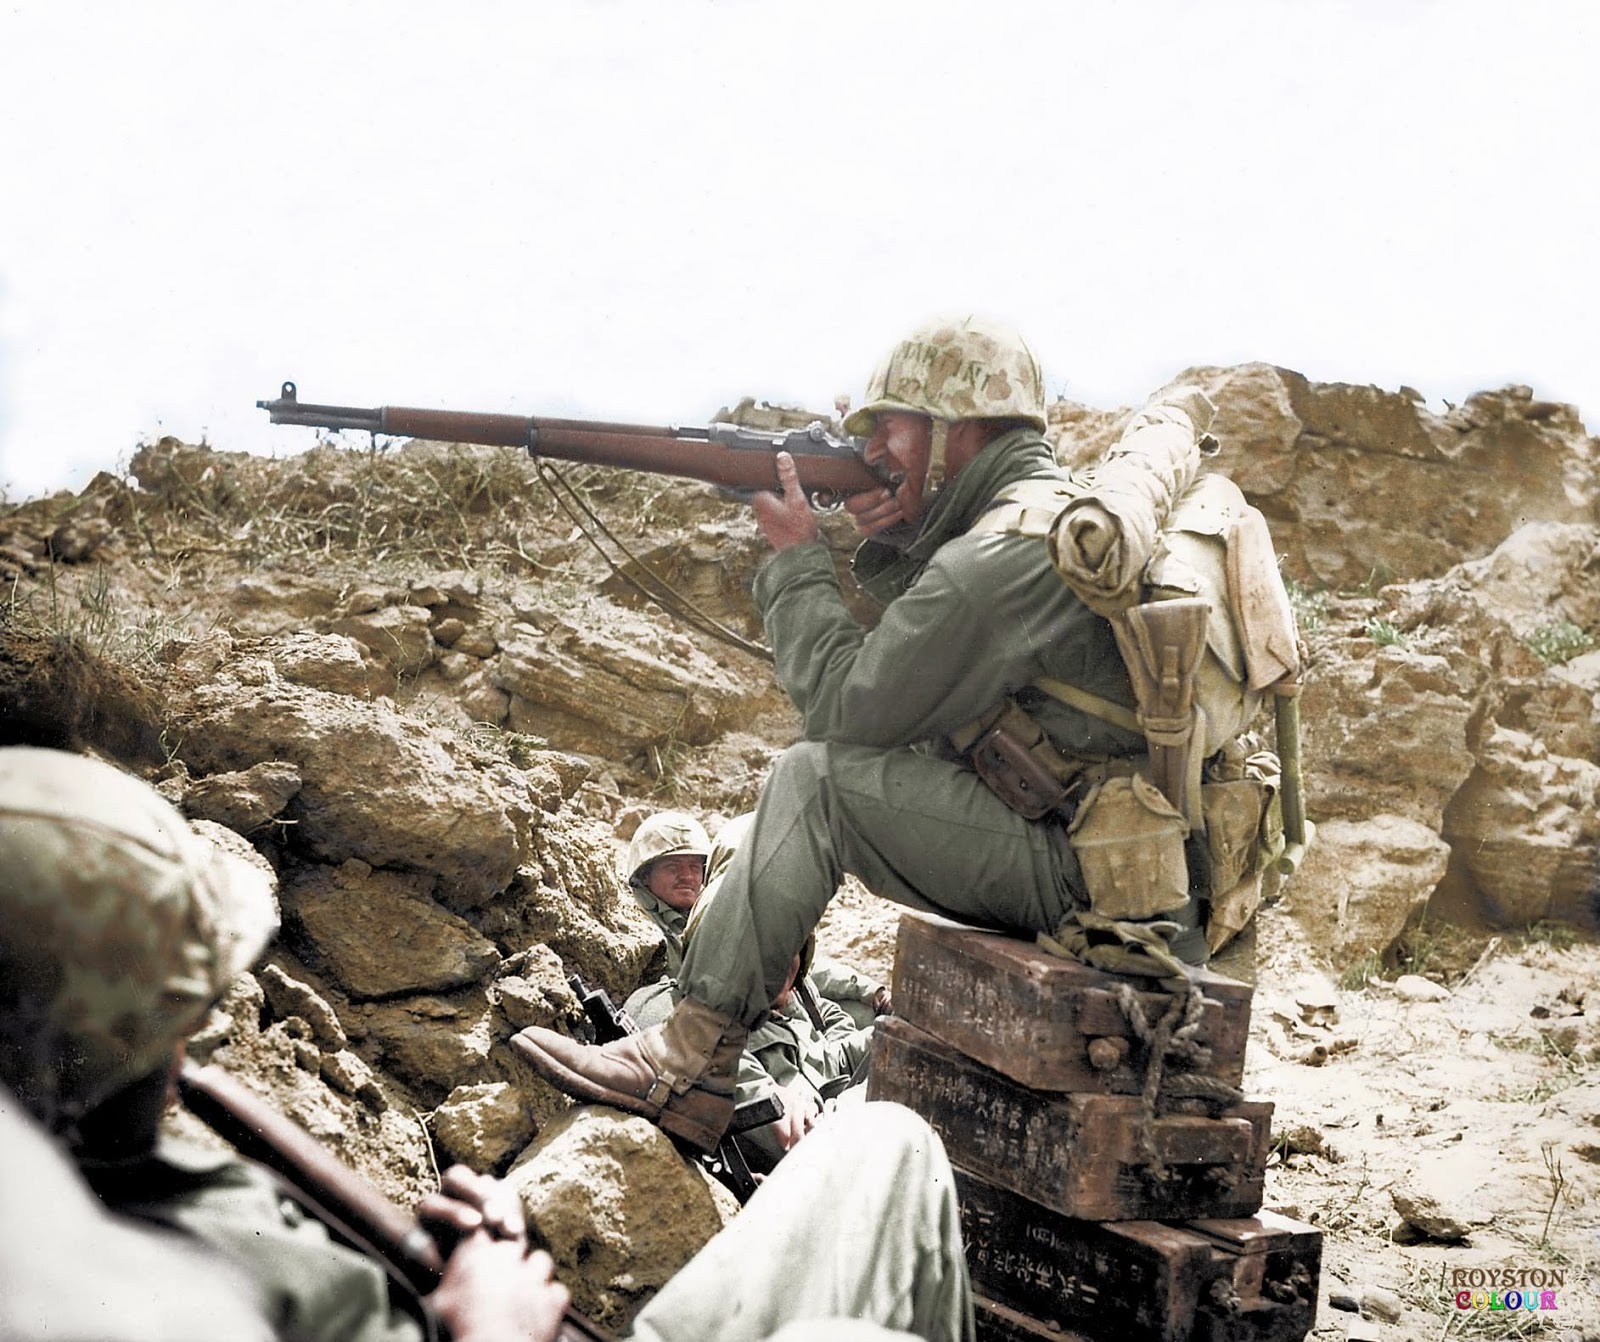 An American Marine aiming his Garand M1 rifle, whilst perched on Japanese ammunition crates on the Island of Iwo Jima, c. February/March 1945